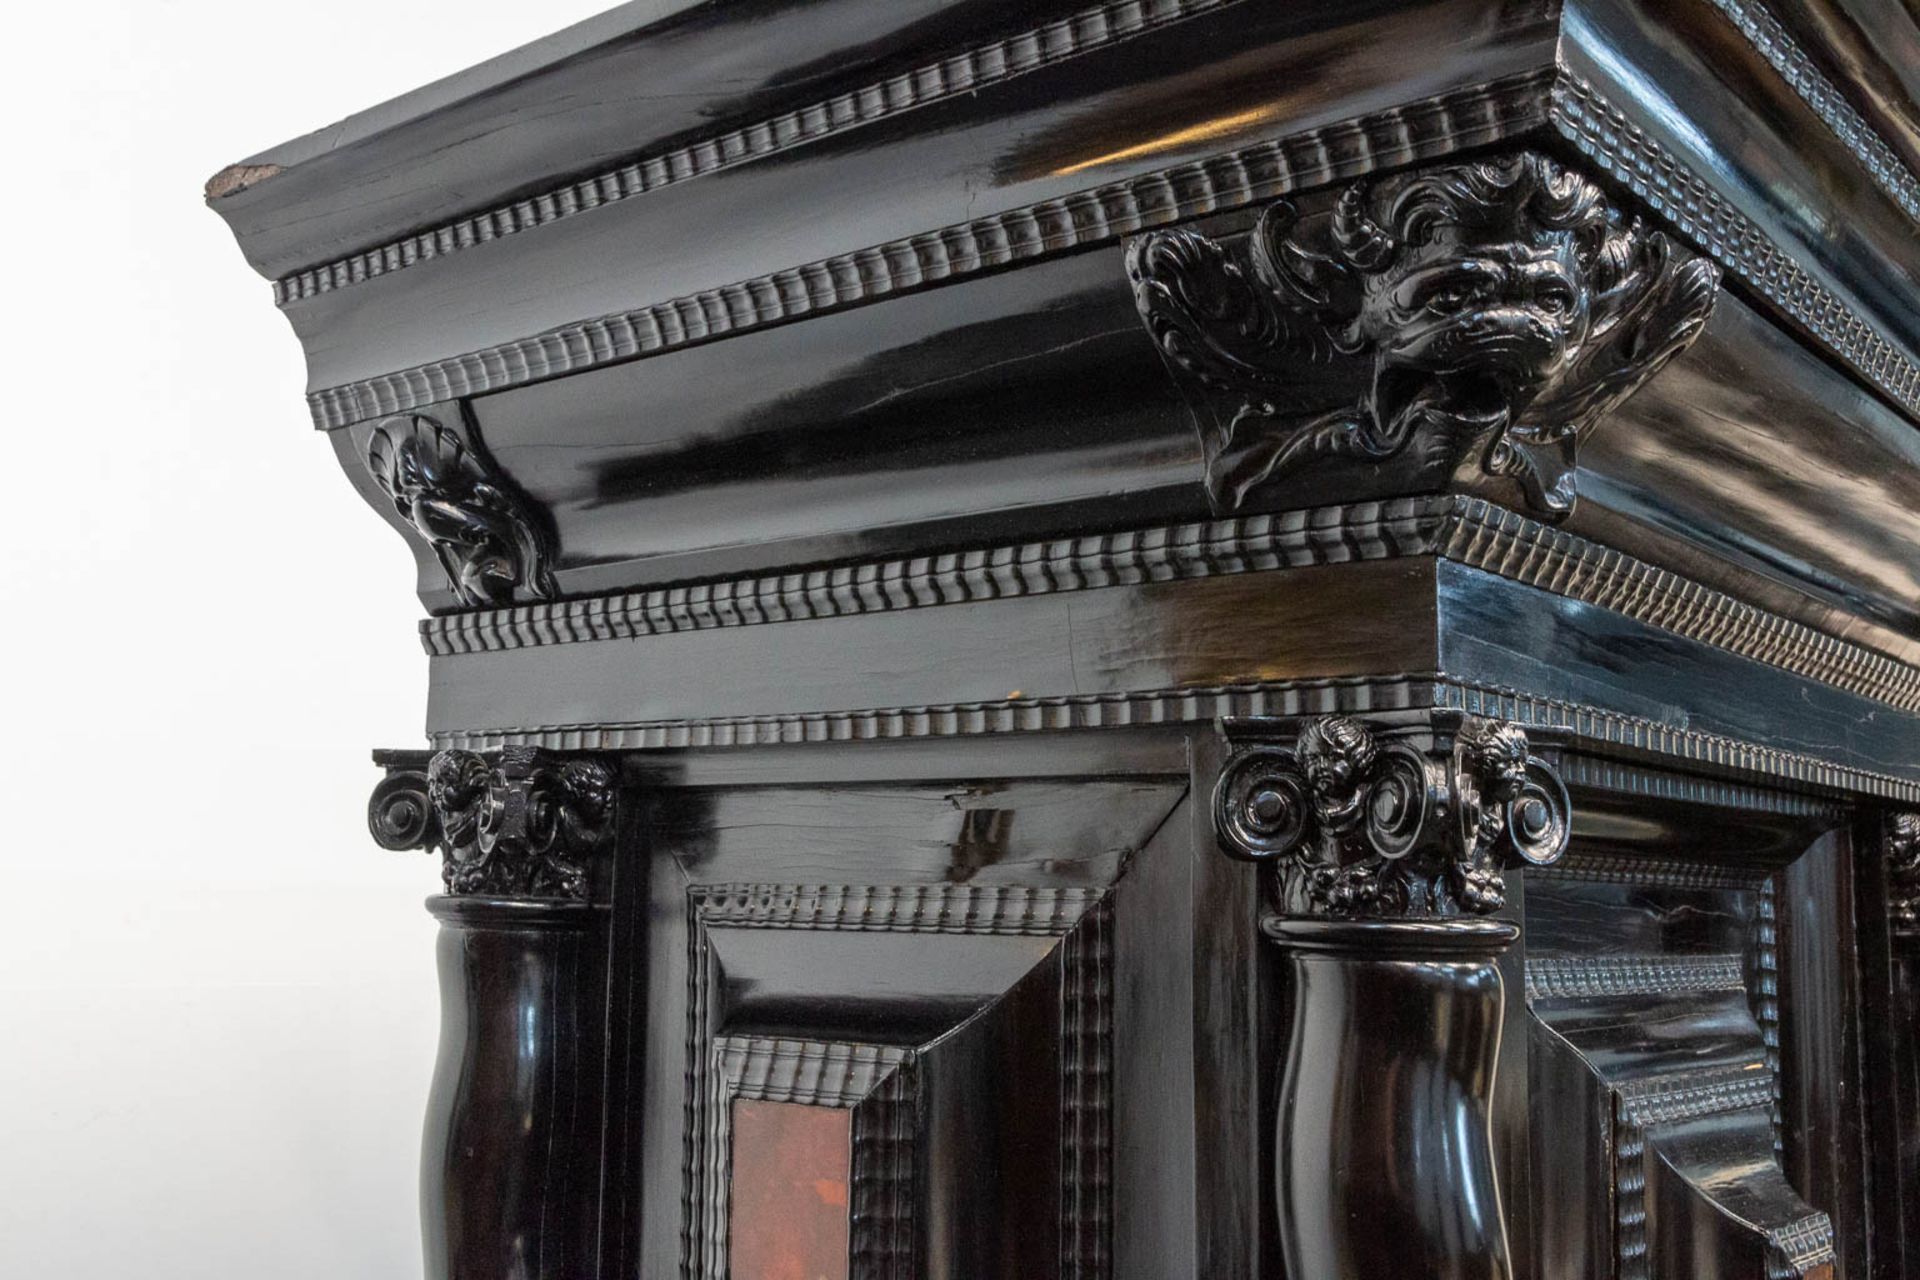 An exceptional Dutch pillow cabinet, ebony veneer, inlaid with tortoiseshell. The second half of the - Image 7 of 10